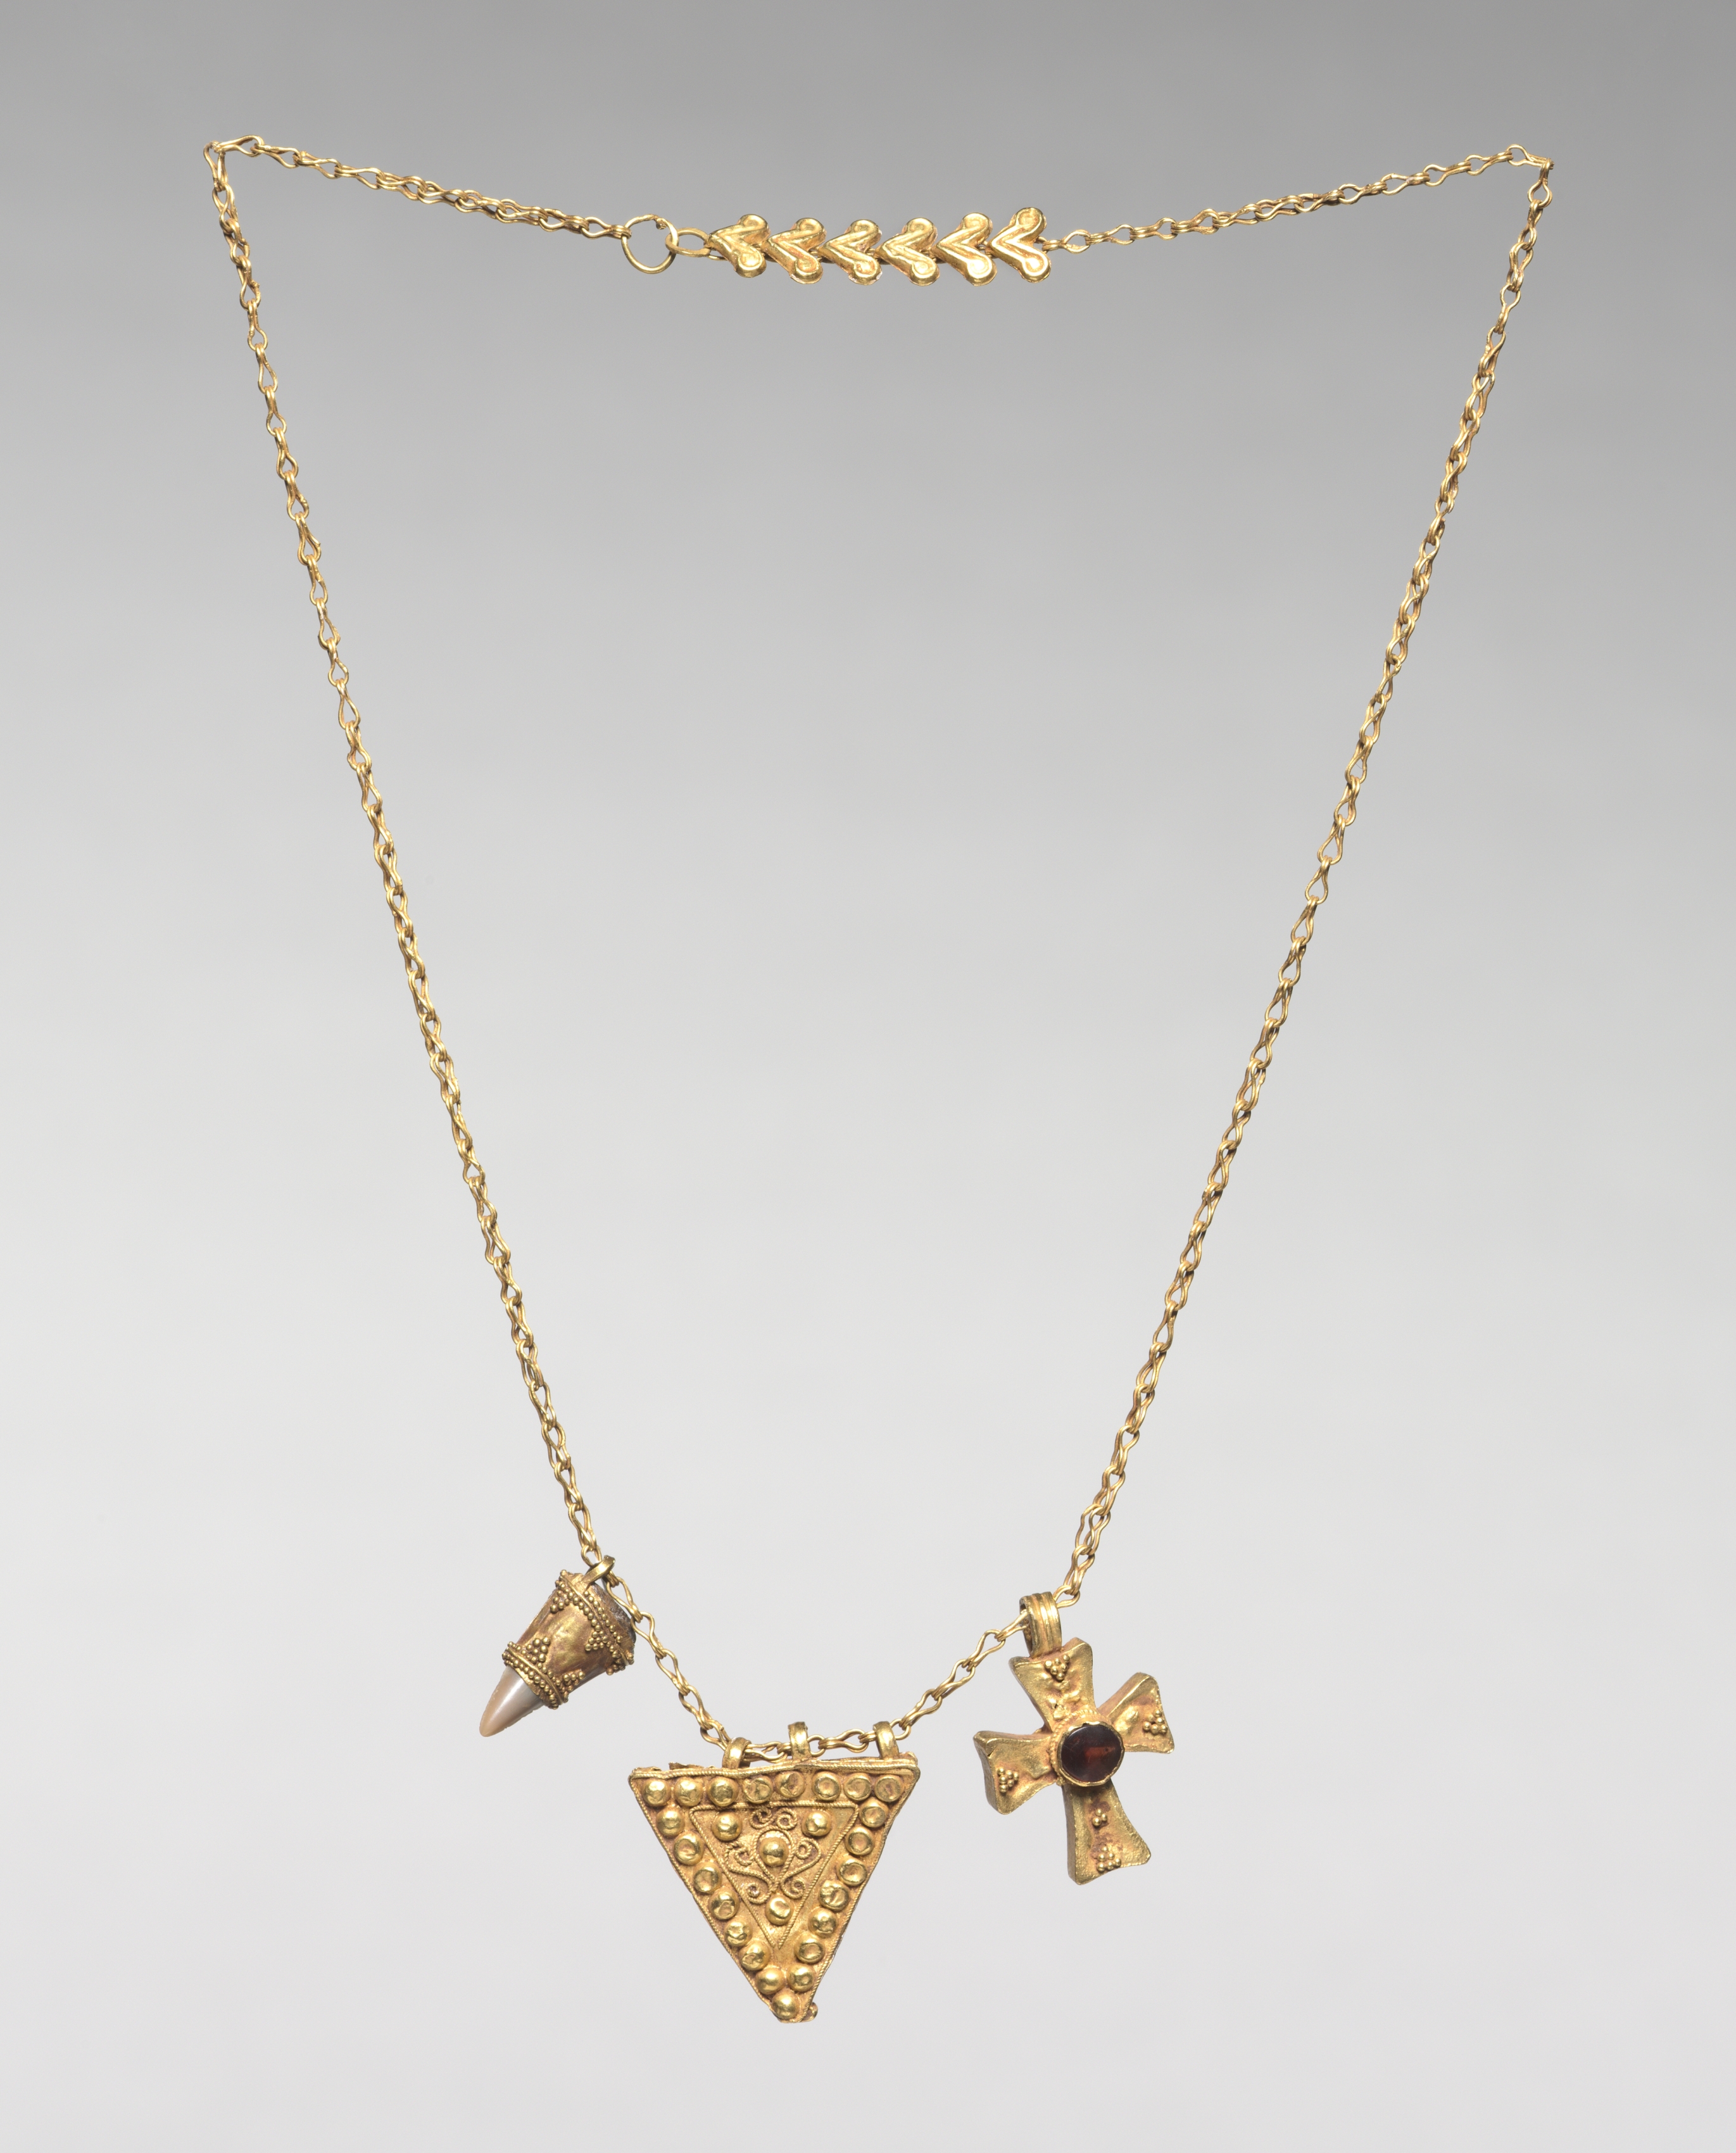 Chain with Two Pendants and a Cross